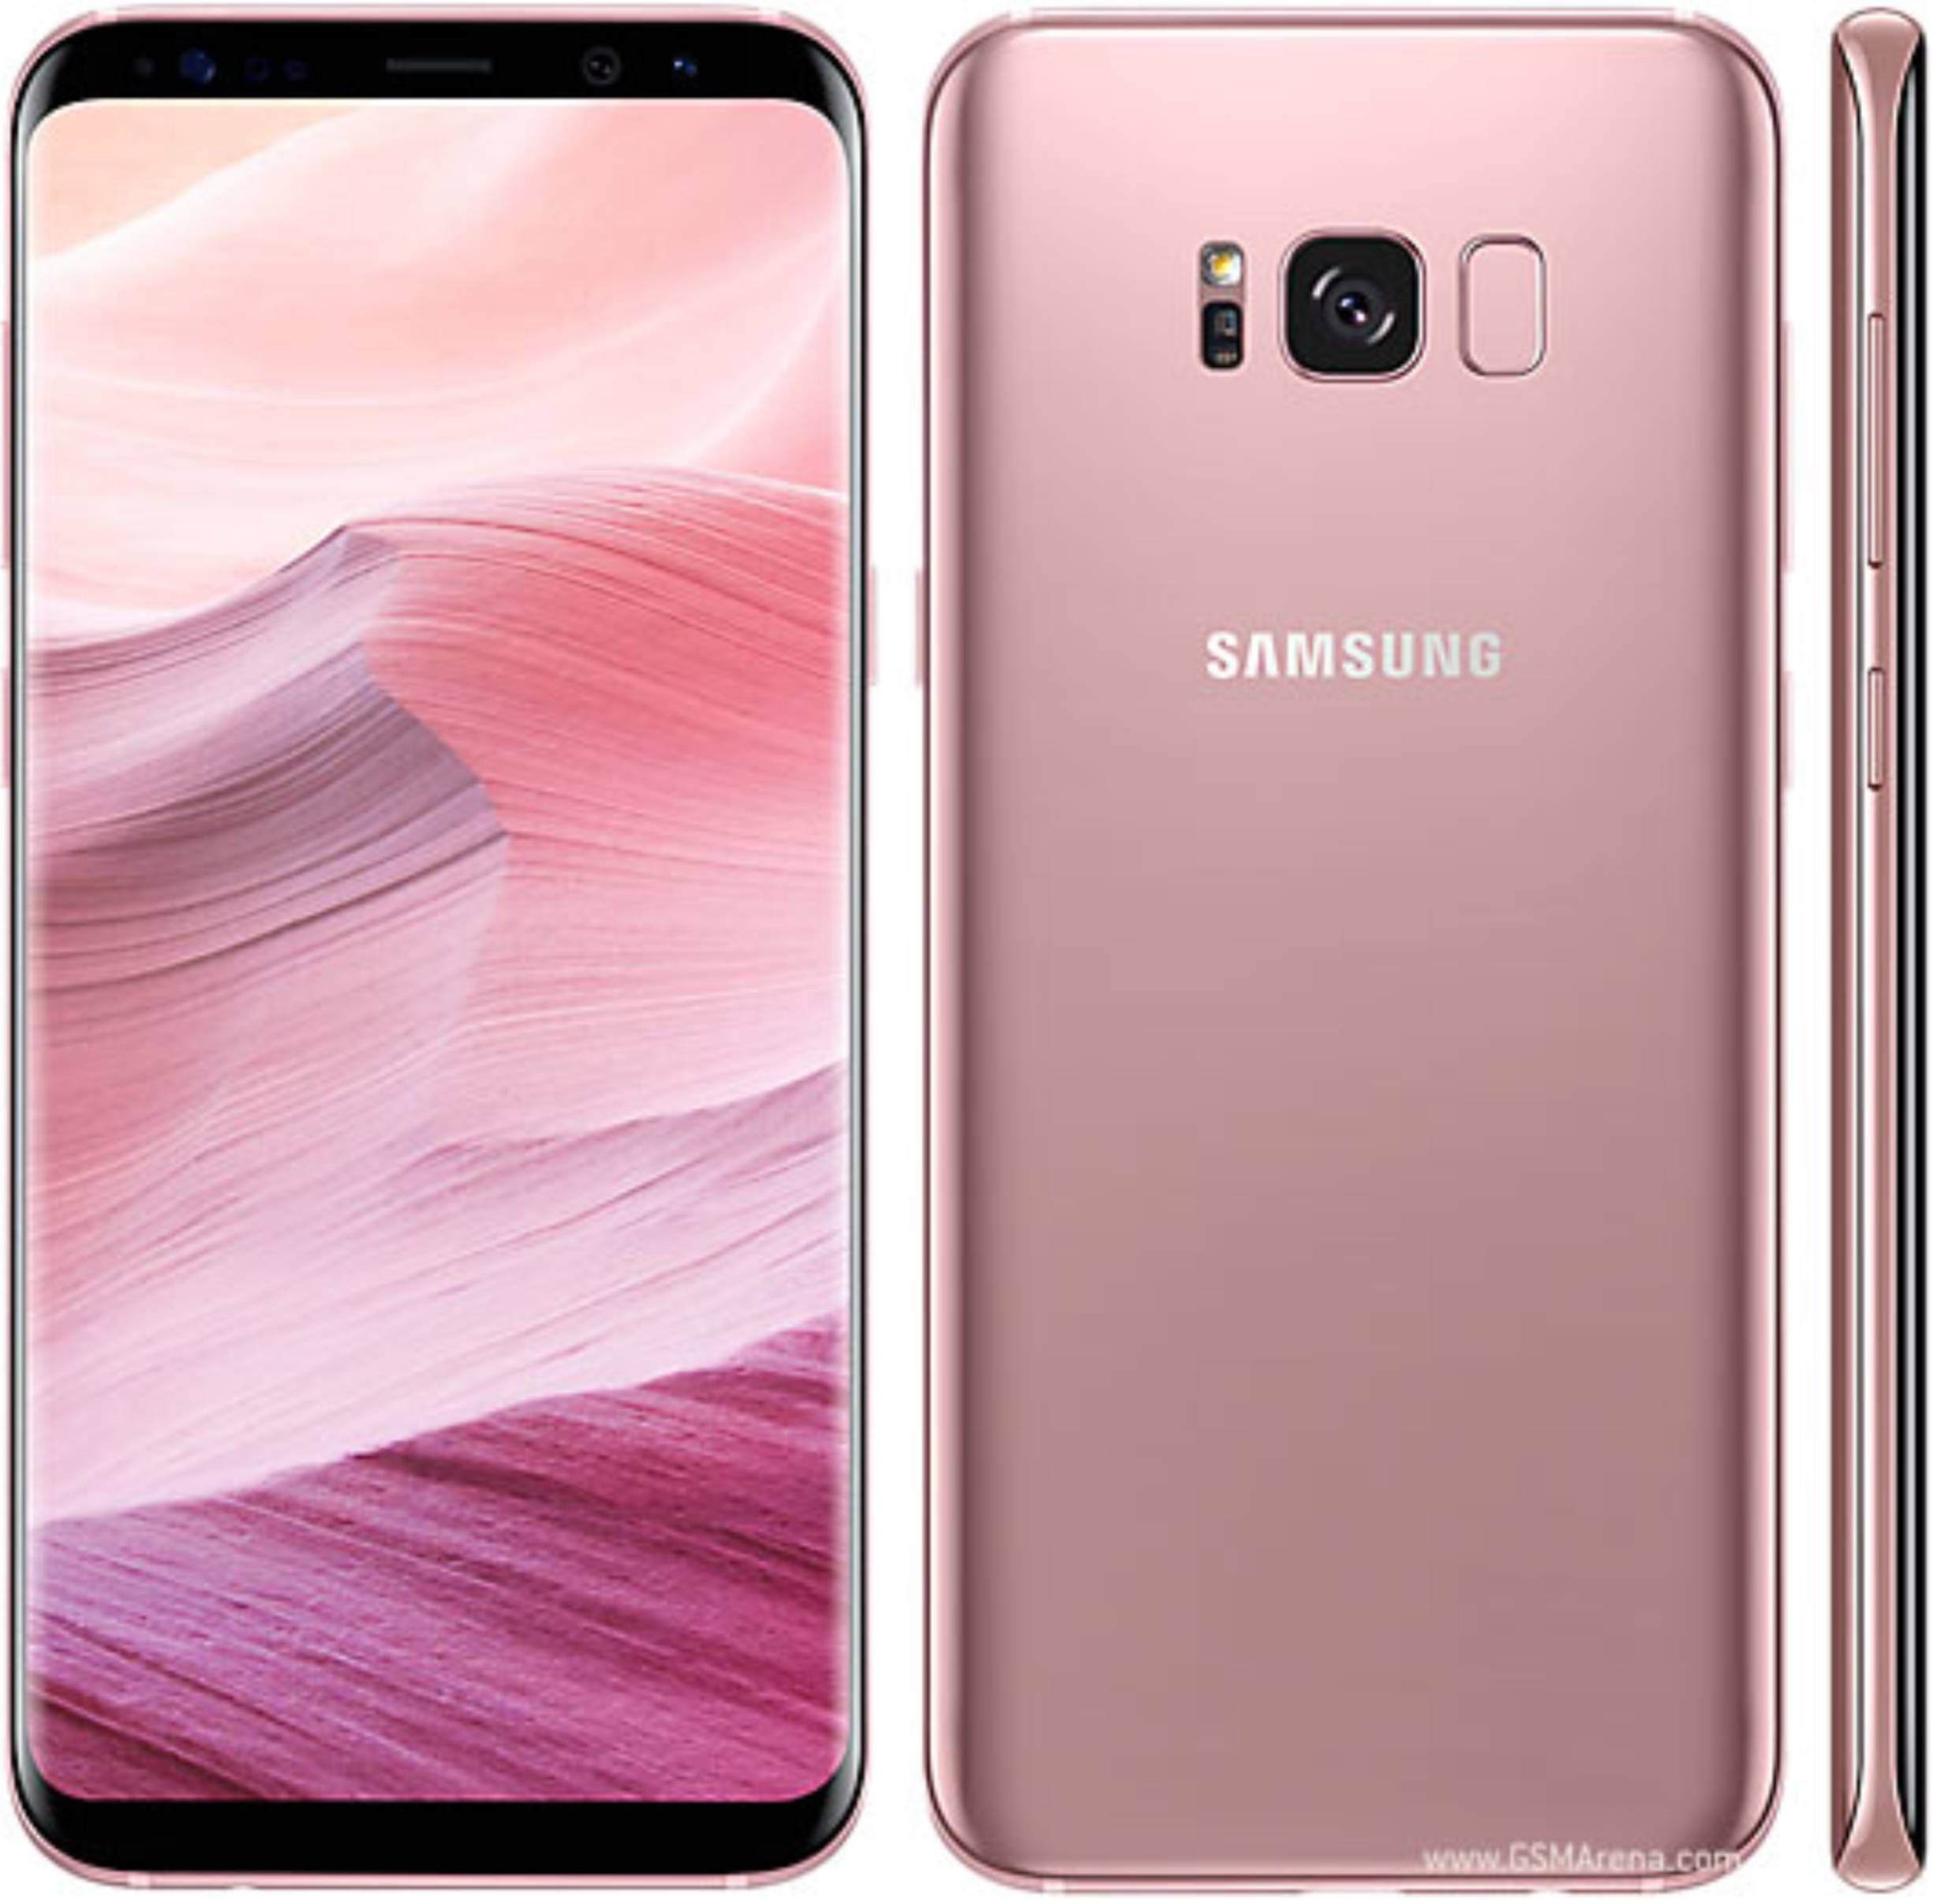 What is Samsung Galaxy S8+ Screen Replacement Cost in Kenya?